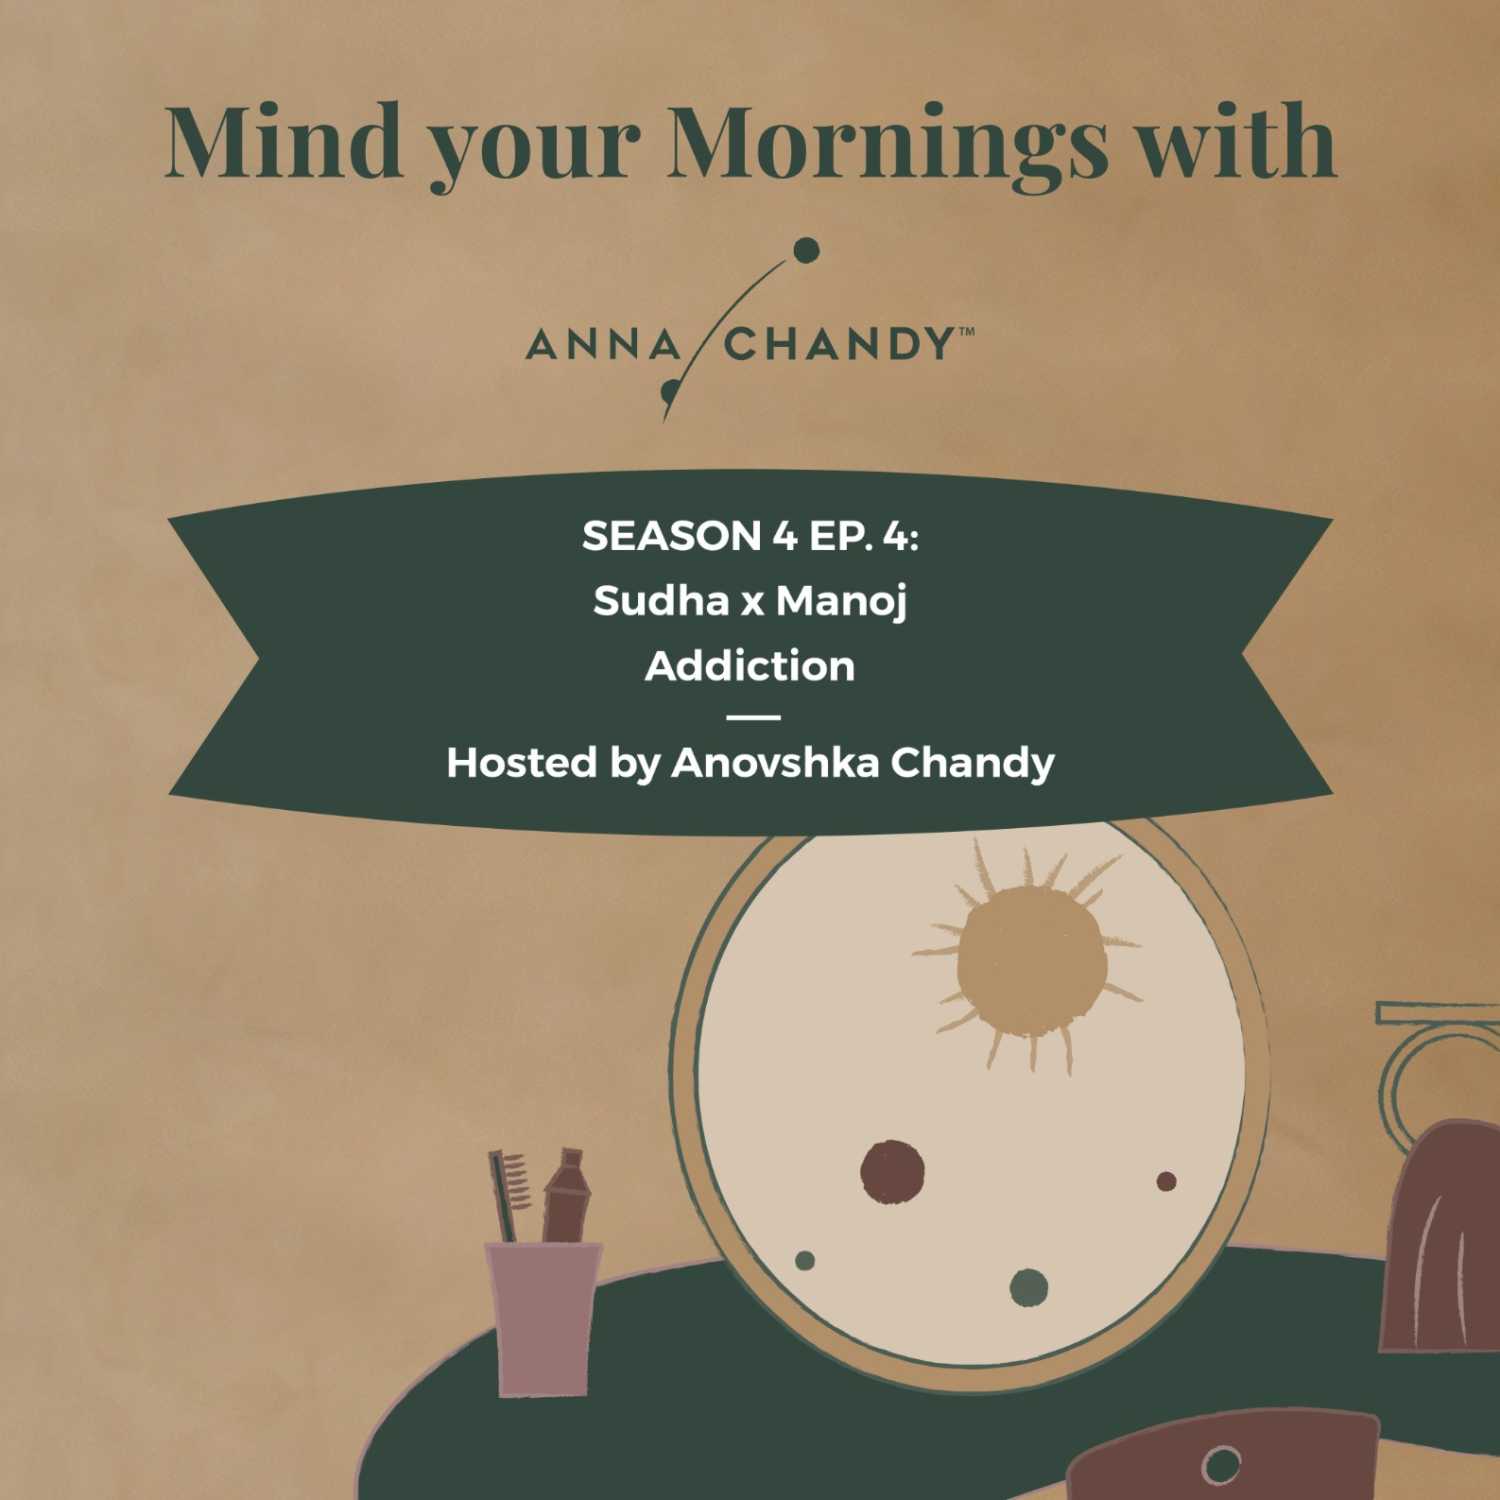 Mind Your Mornings With Anna Chandy - Addiction with Sudha & Manoj